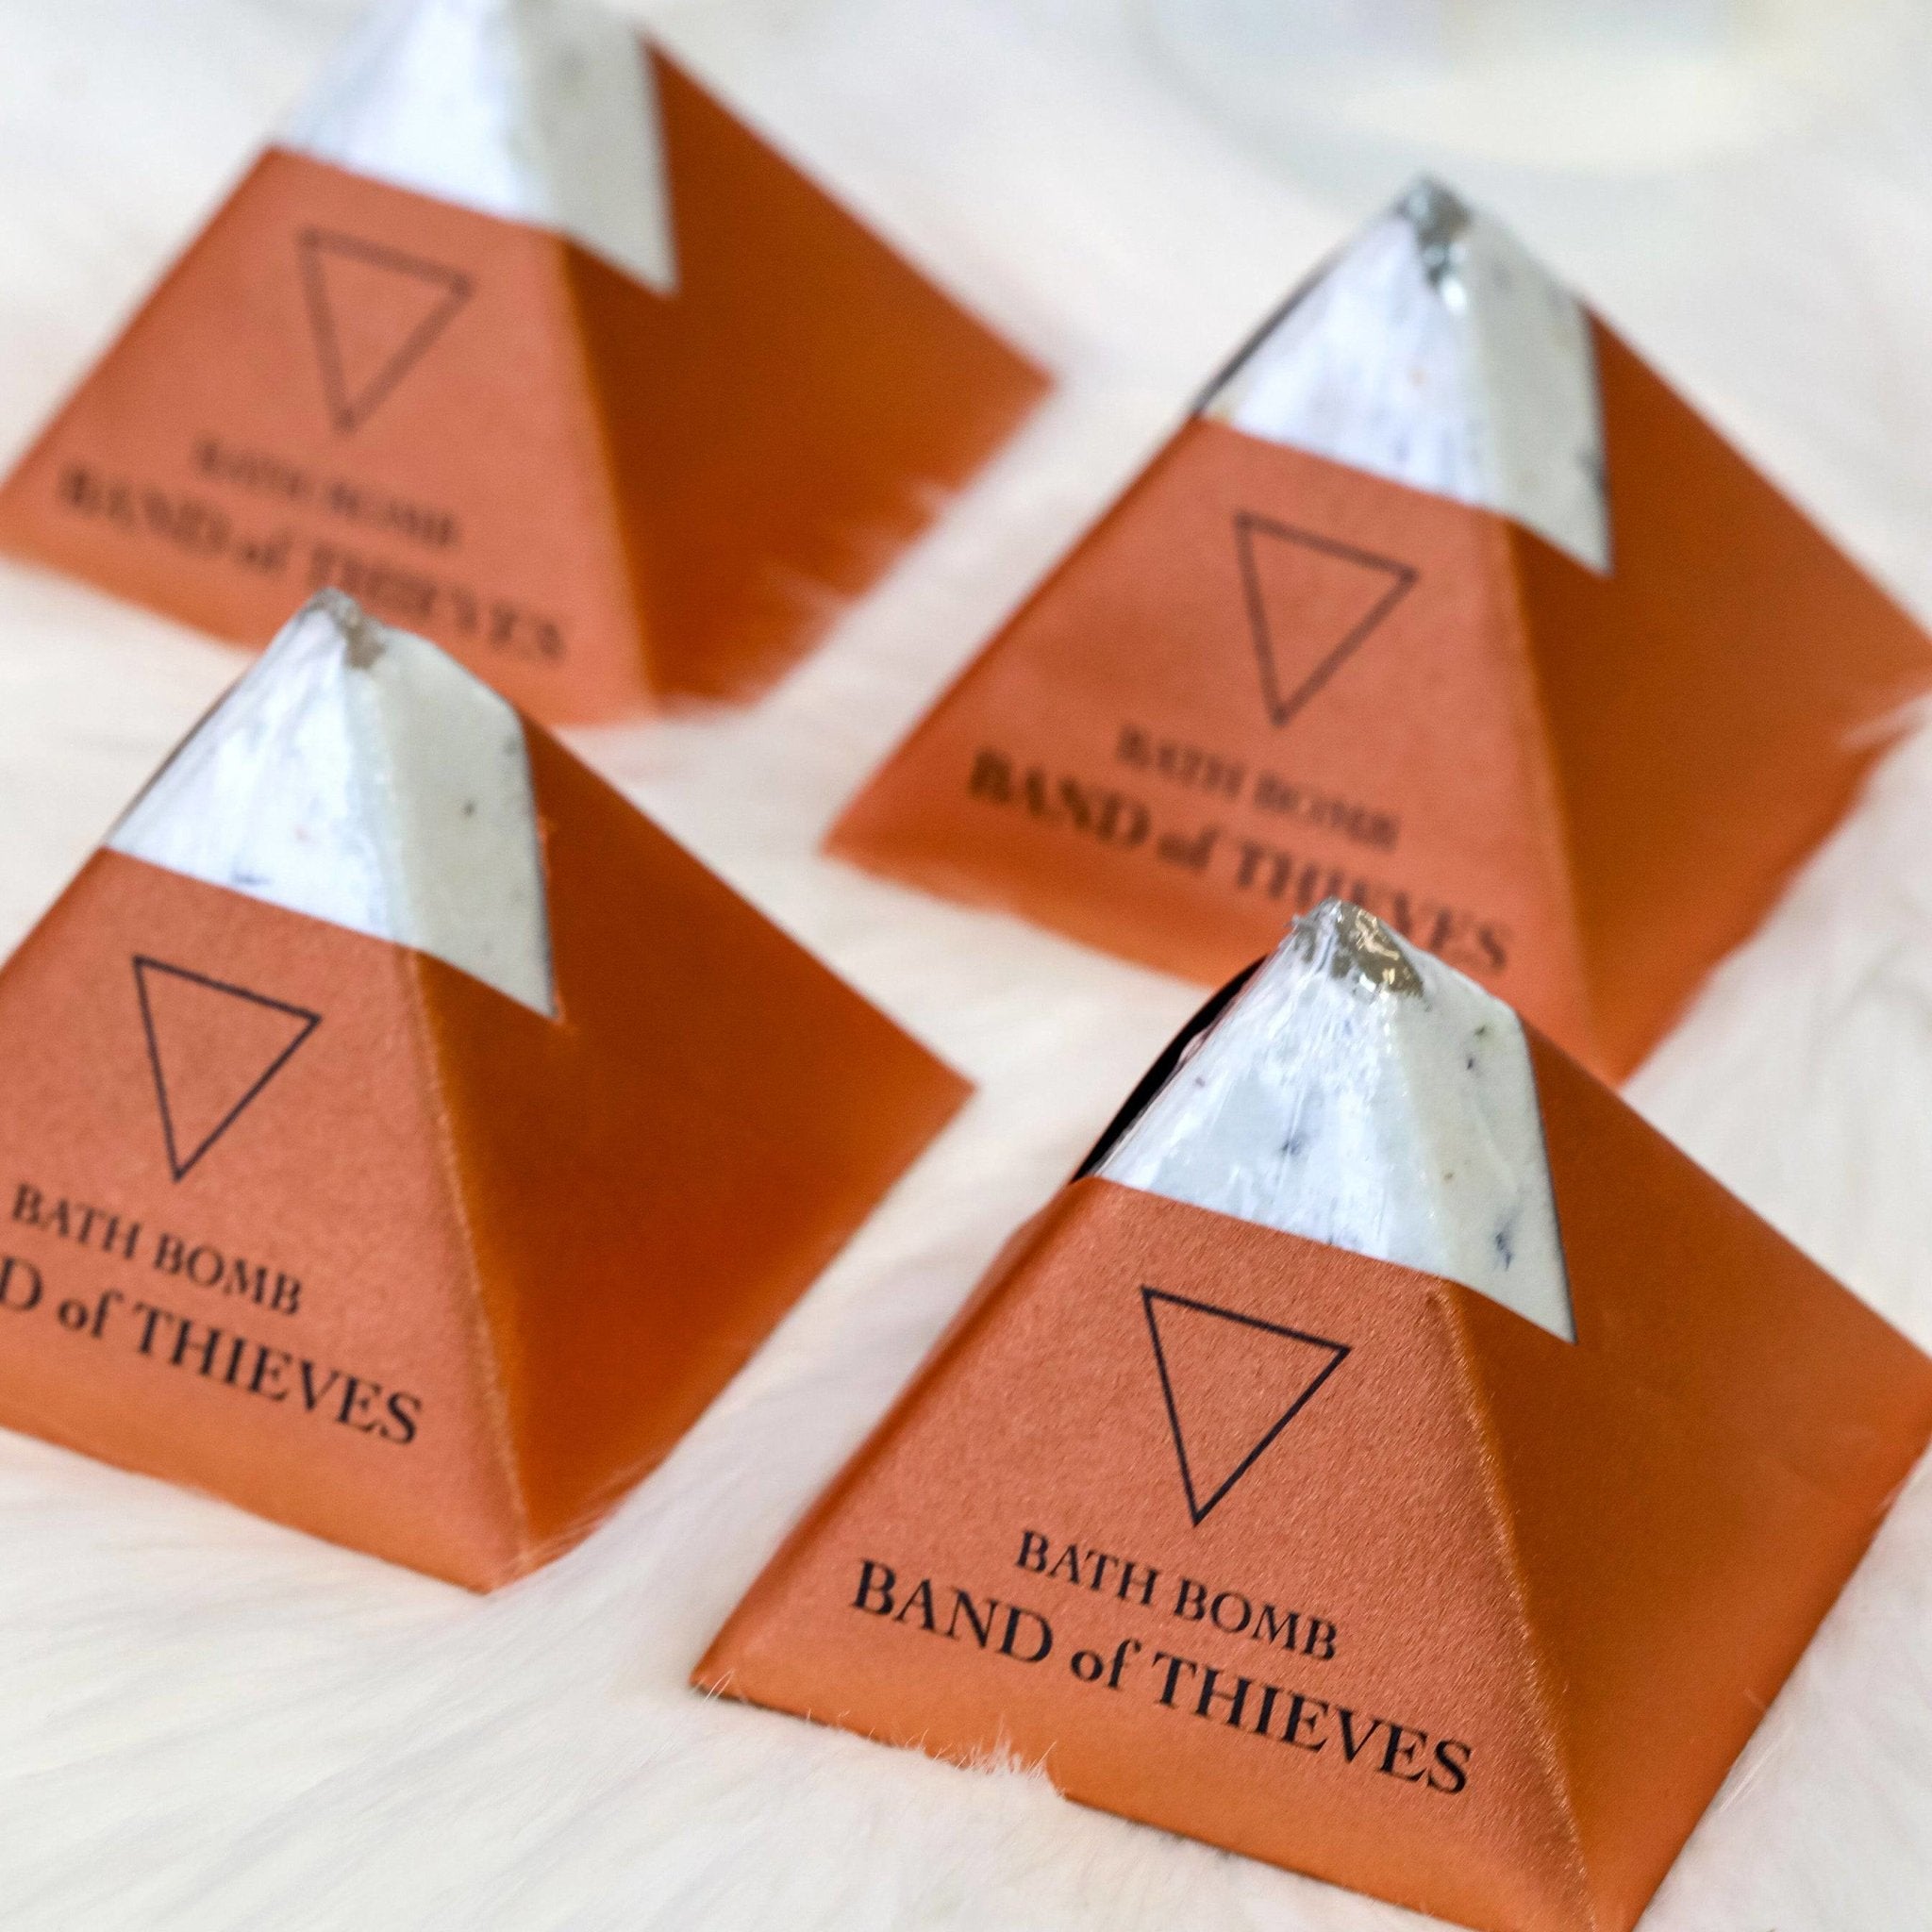 Band of Thieves Pyramid Bath Bomb - The Gilded Witch